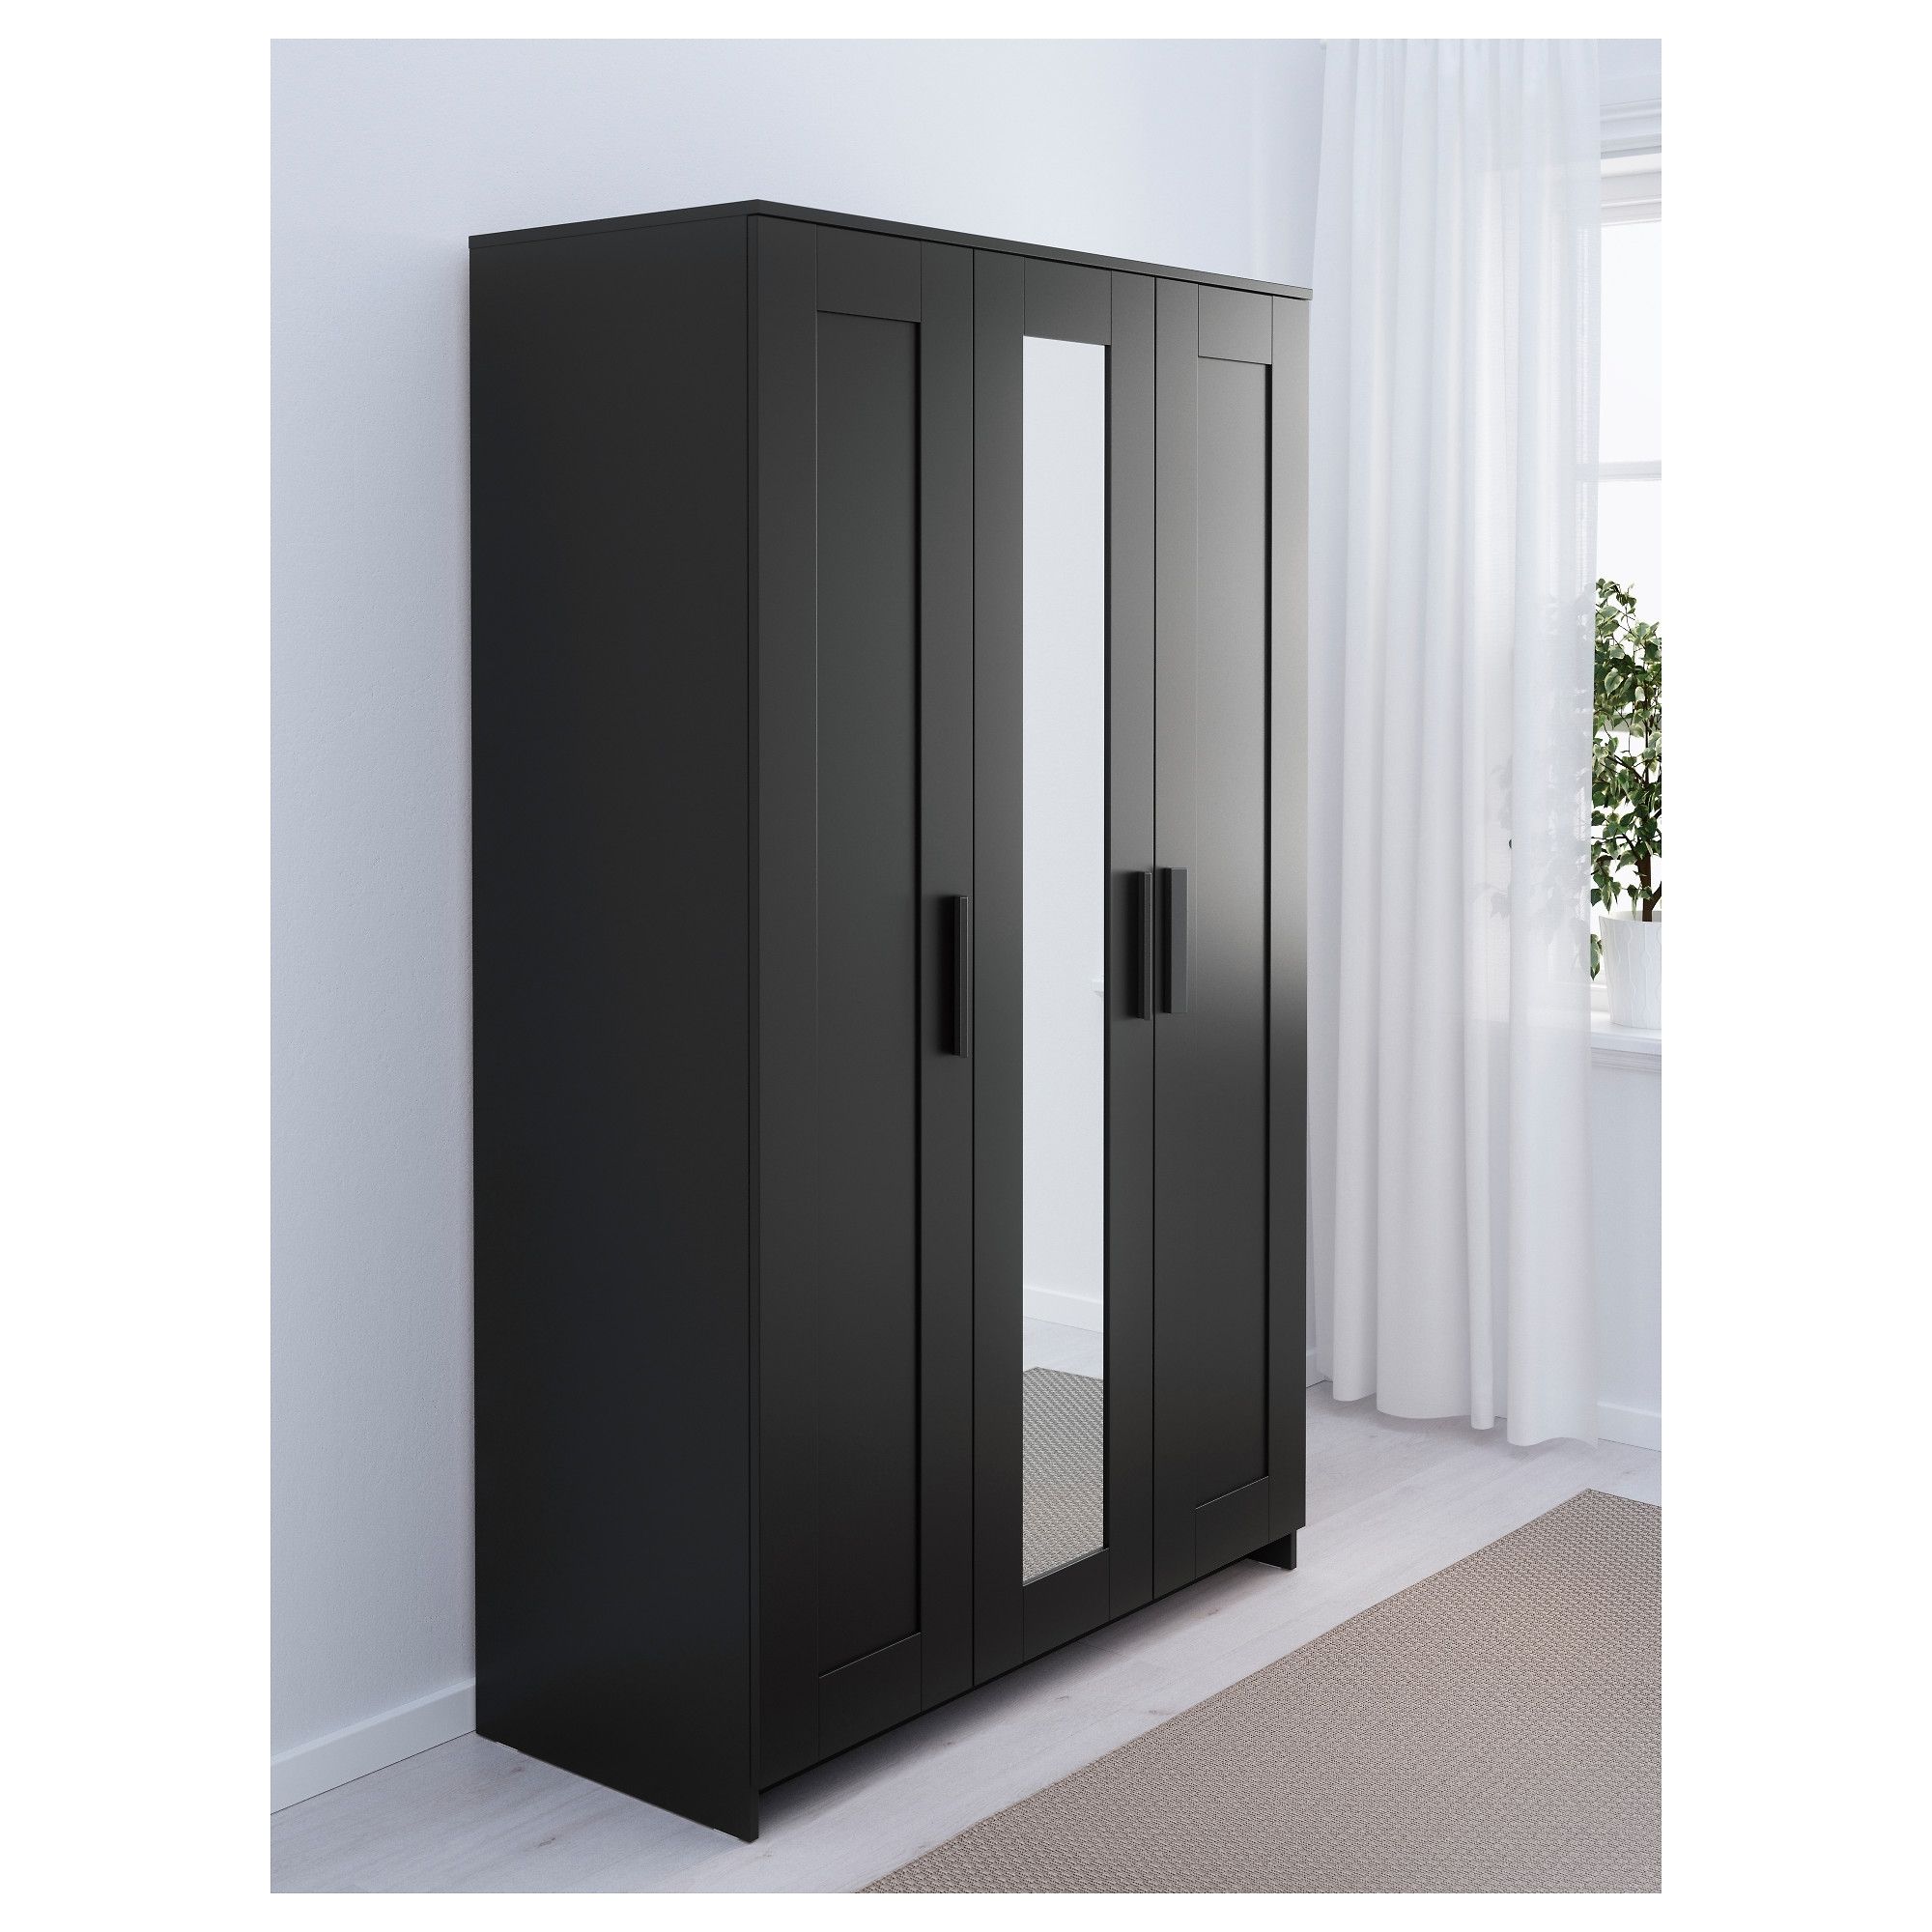 3 Doors Wardrobes With Mirror Throughout Trendy Brimnes Wardrobe With 3 Doors – White – Ikea (View 1 of 15)